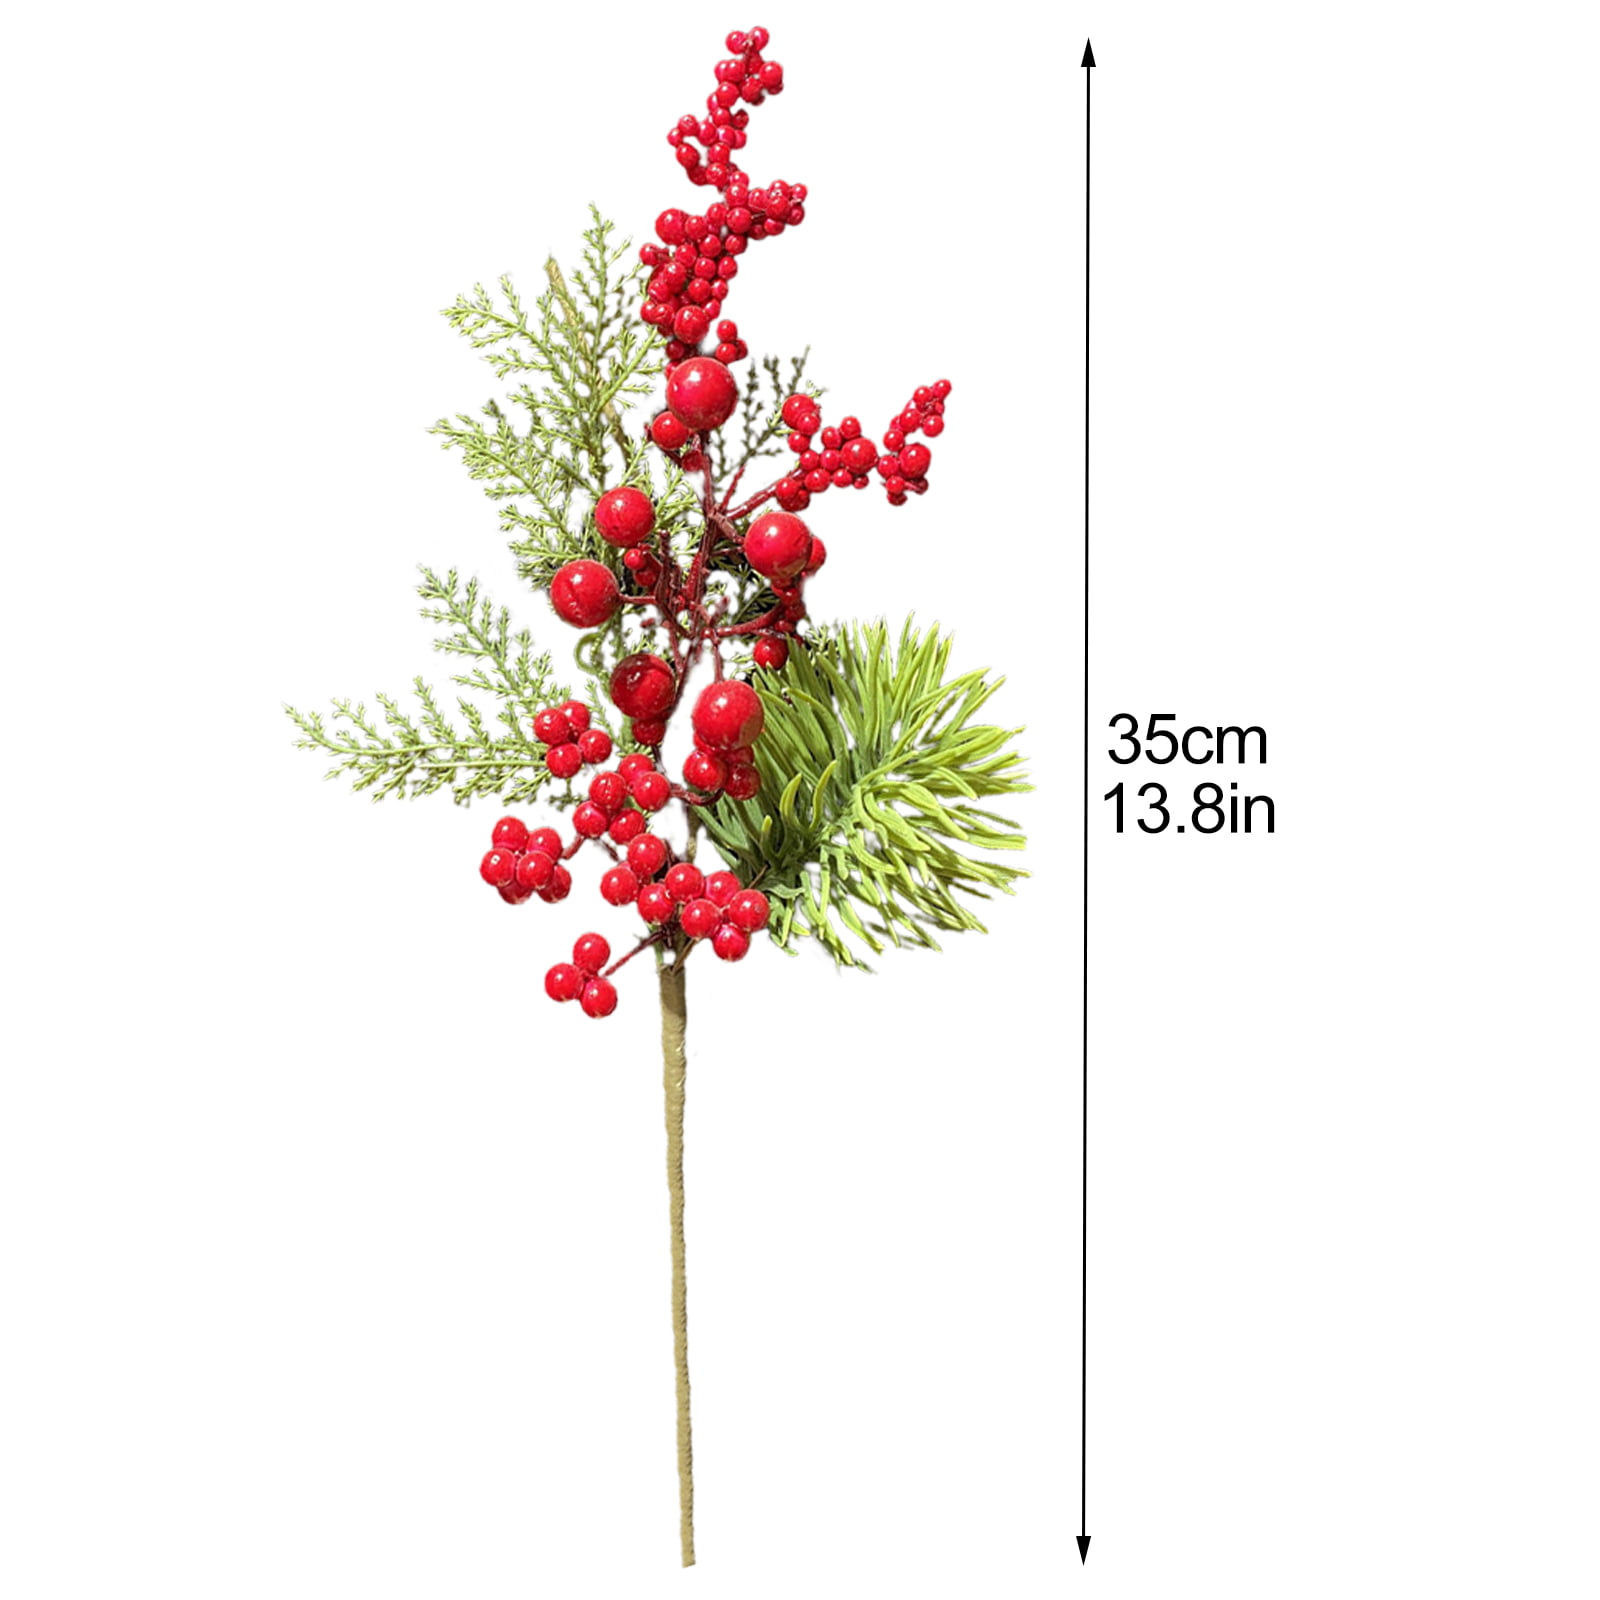 Details about   Artificial Berries Branch Plastic Fake Flowers Leaf Decorative Berry Berries I 